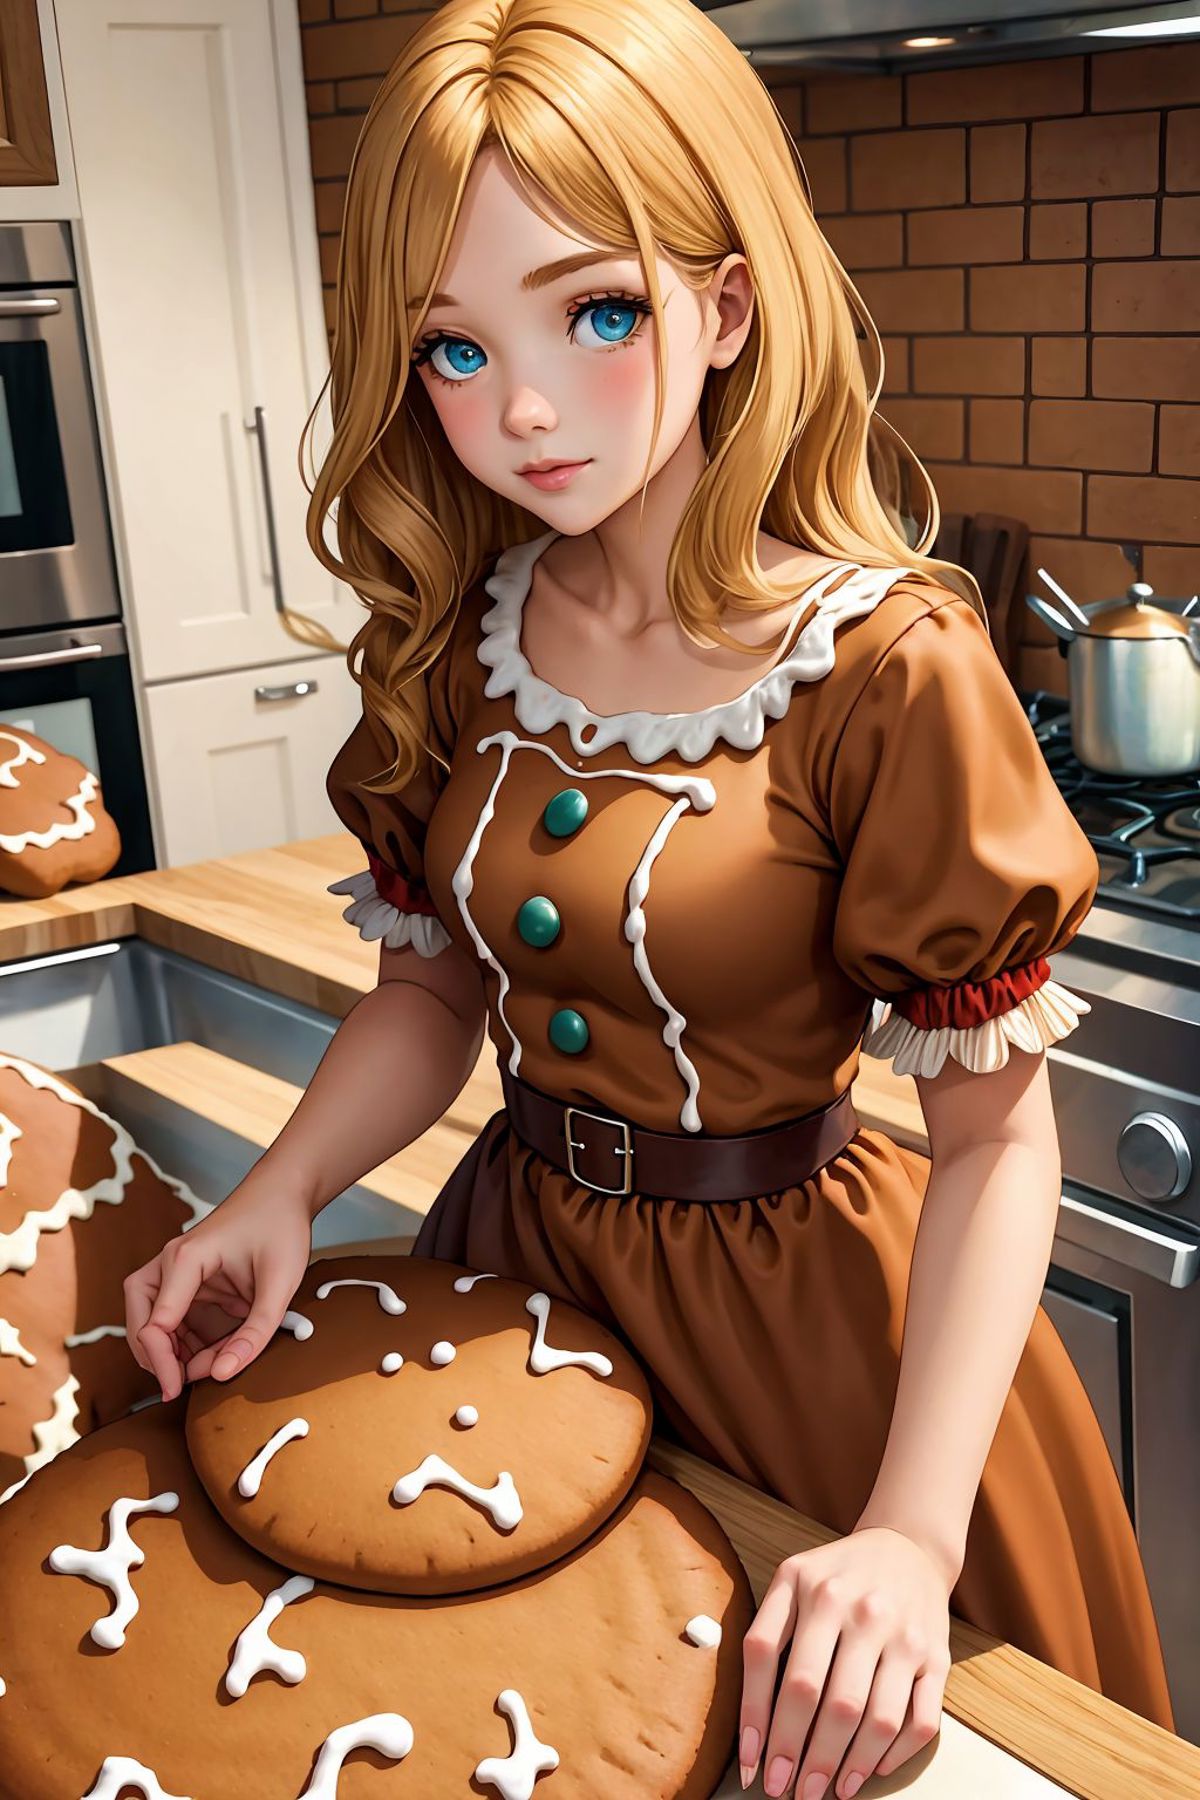 Gingerbread Dress image by Montitto